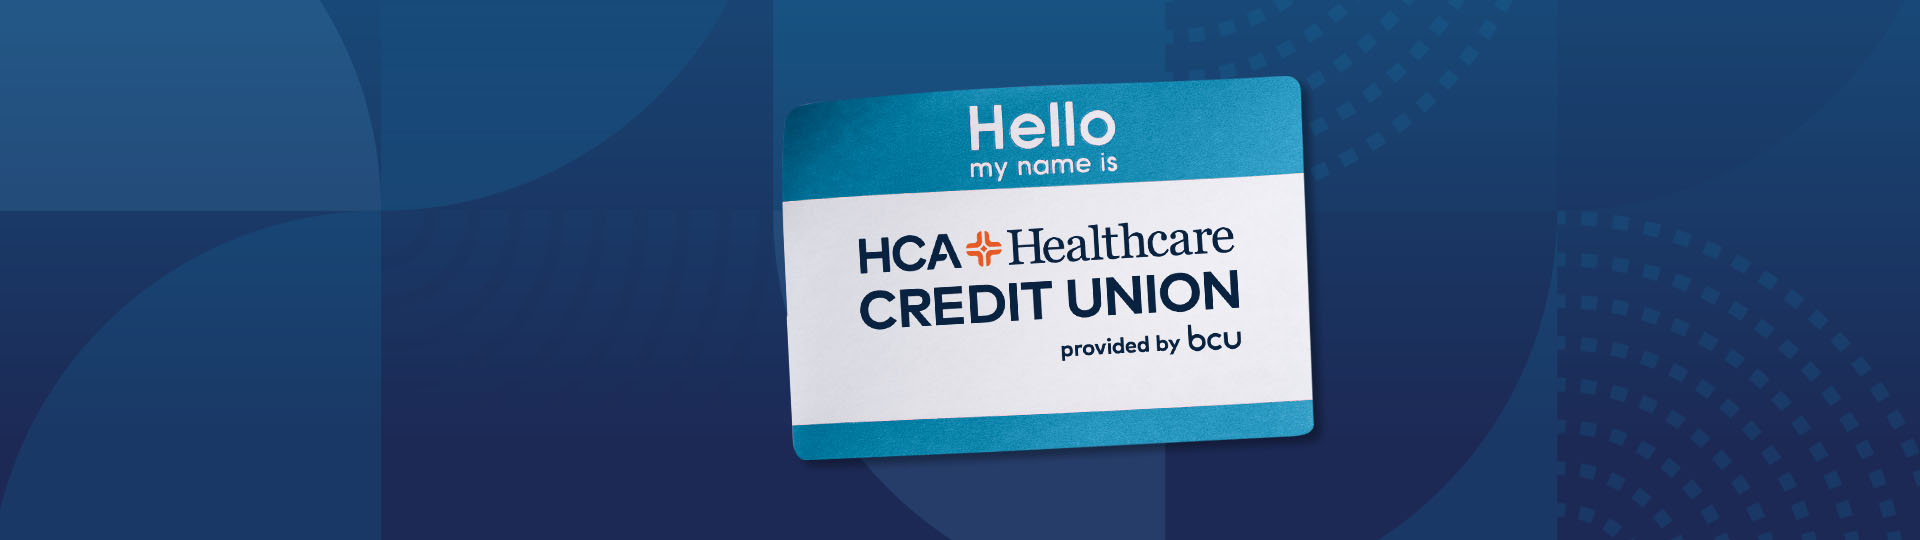 Welcome to HCA Healthcare Credit Union